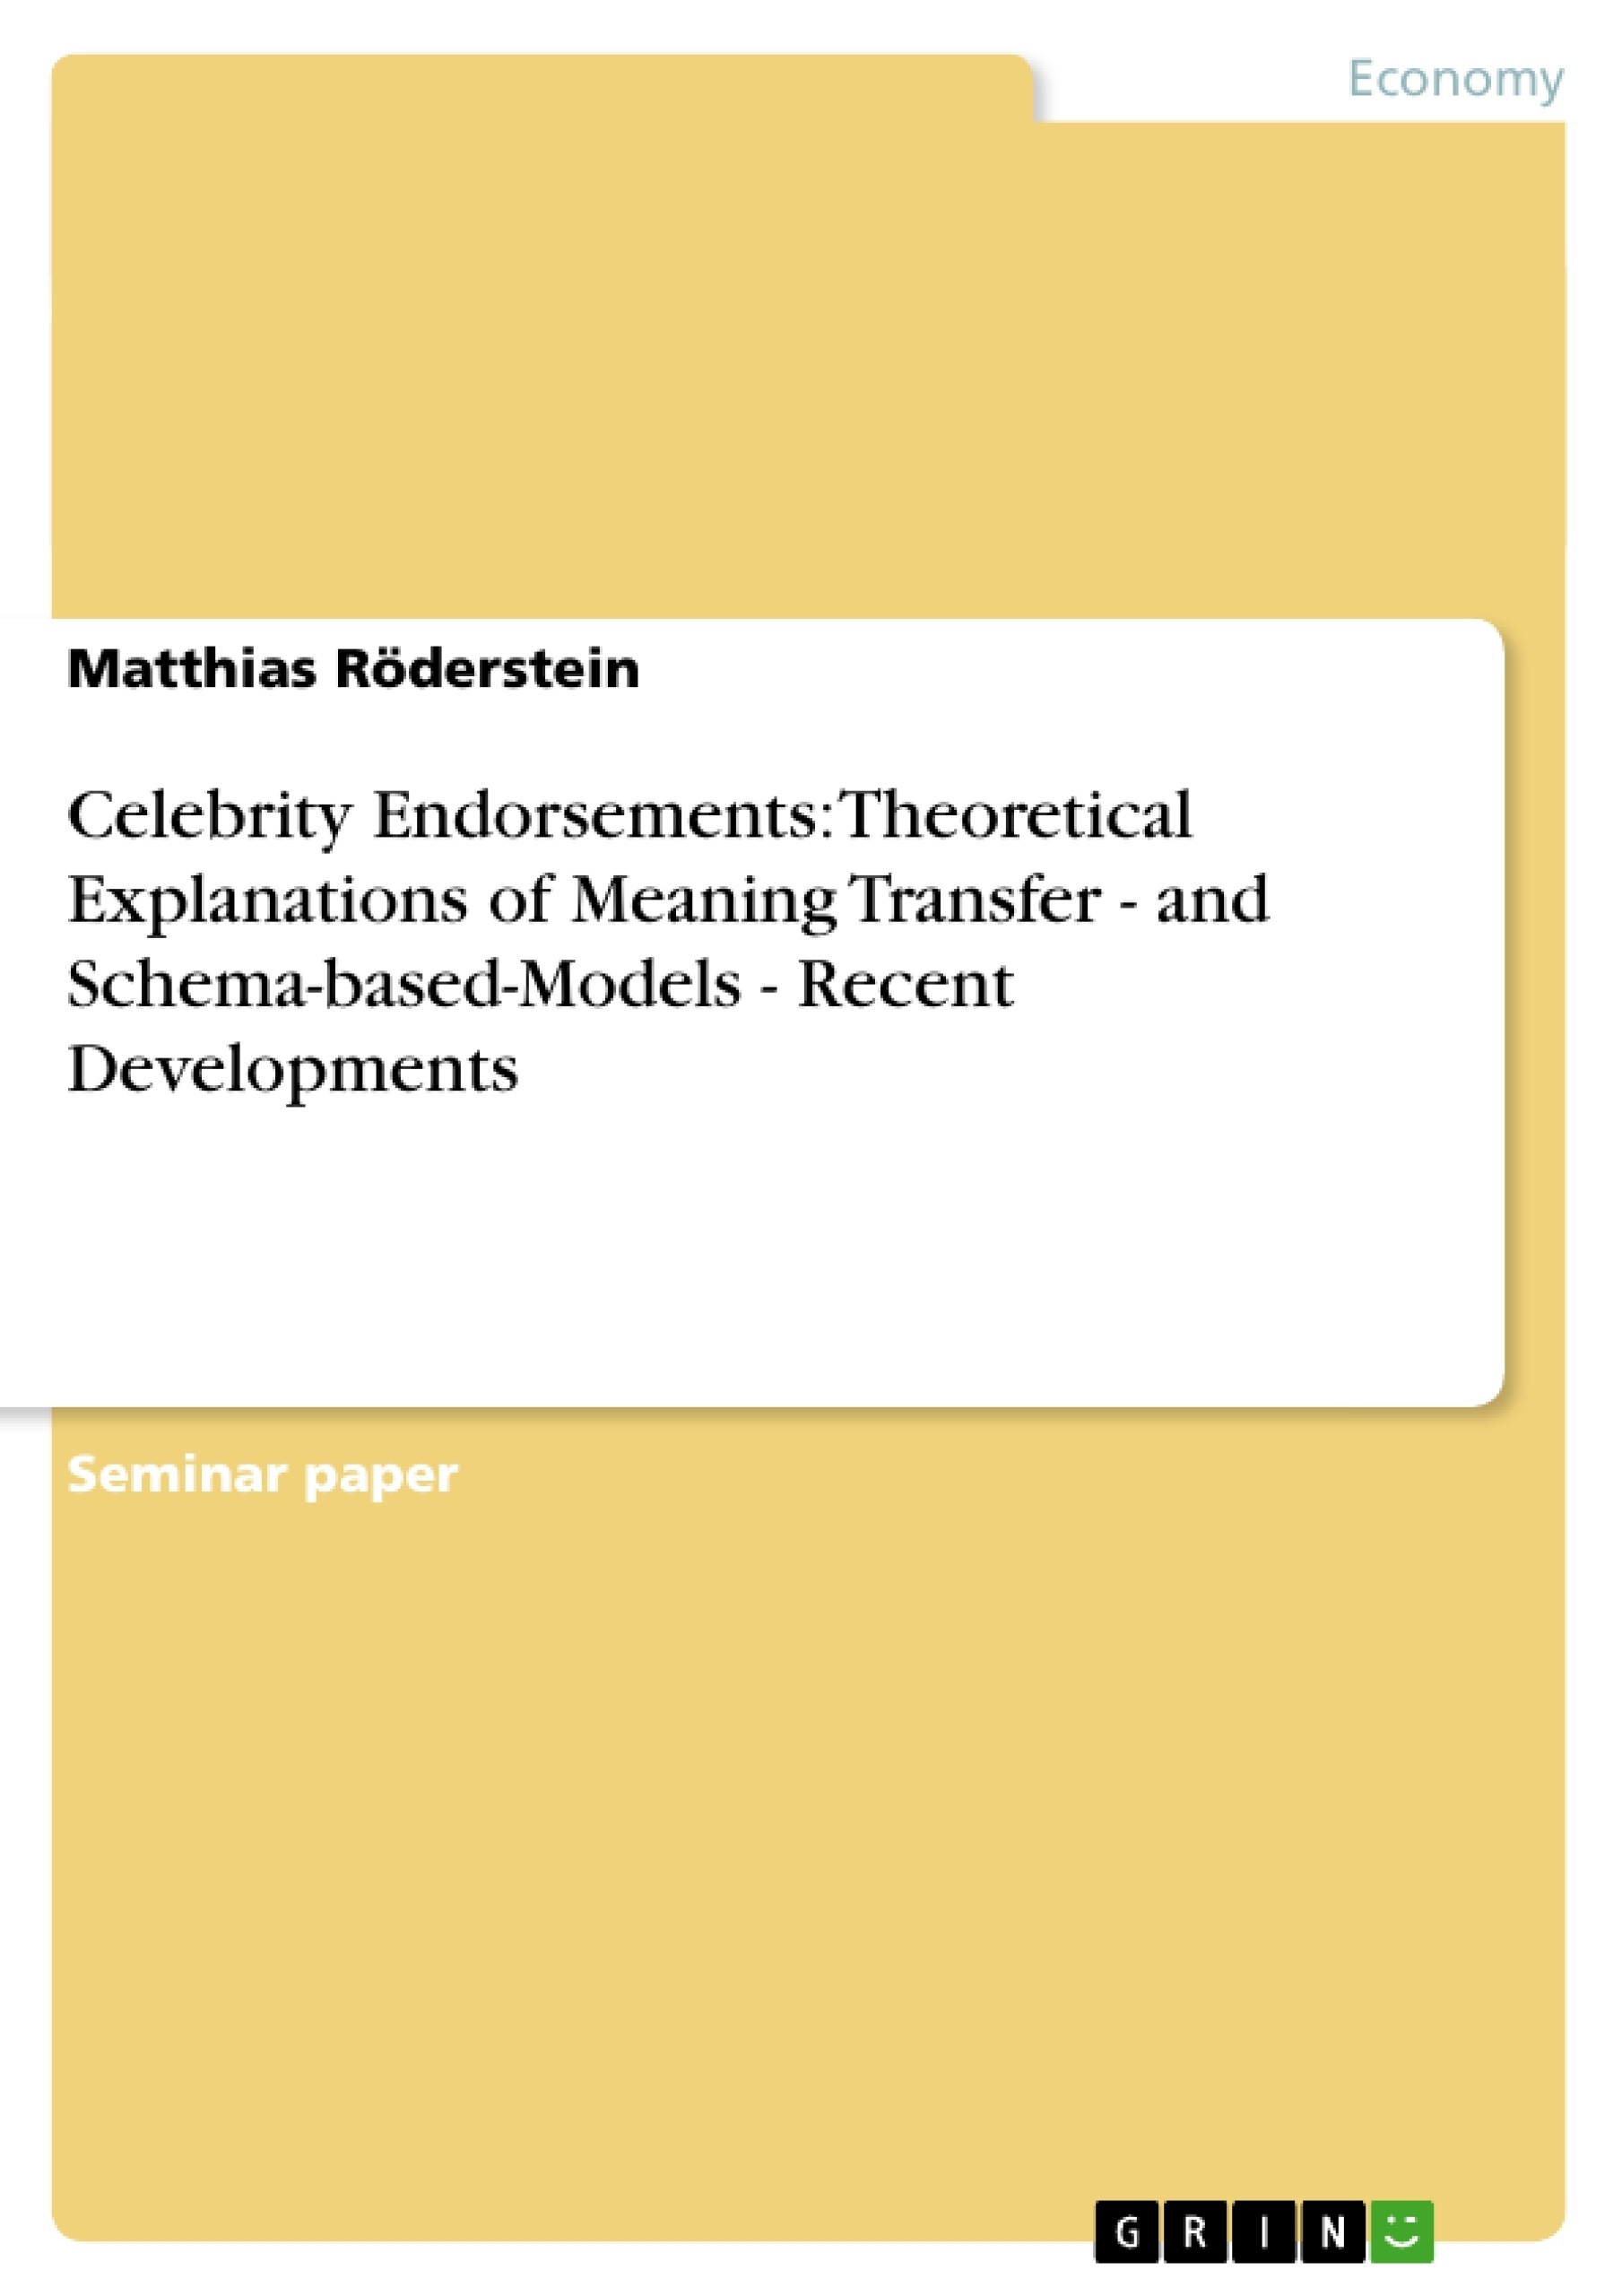 Título: Celebrity Endorsements: Theoretical Explanations of Meaning Transfer - and Schema-based-Models - Recent Developments